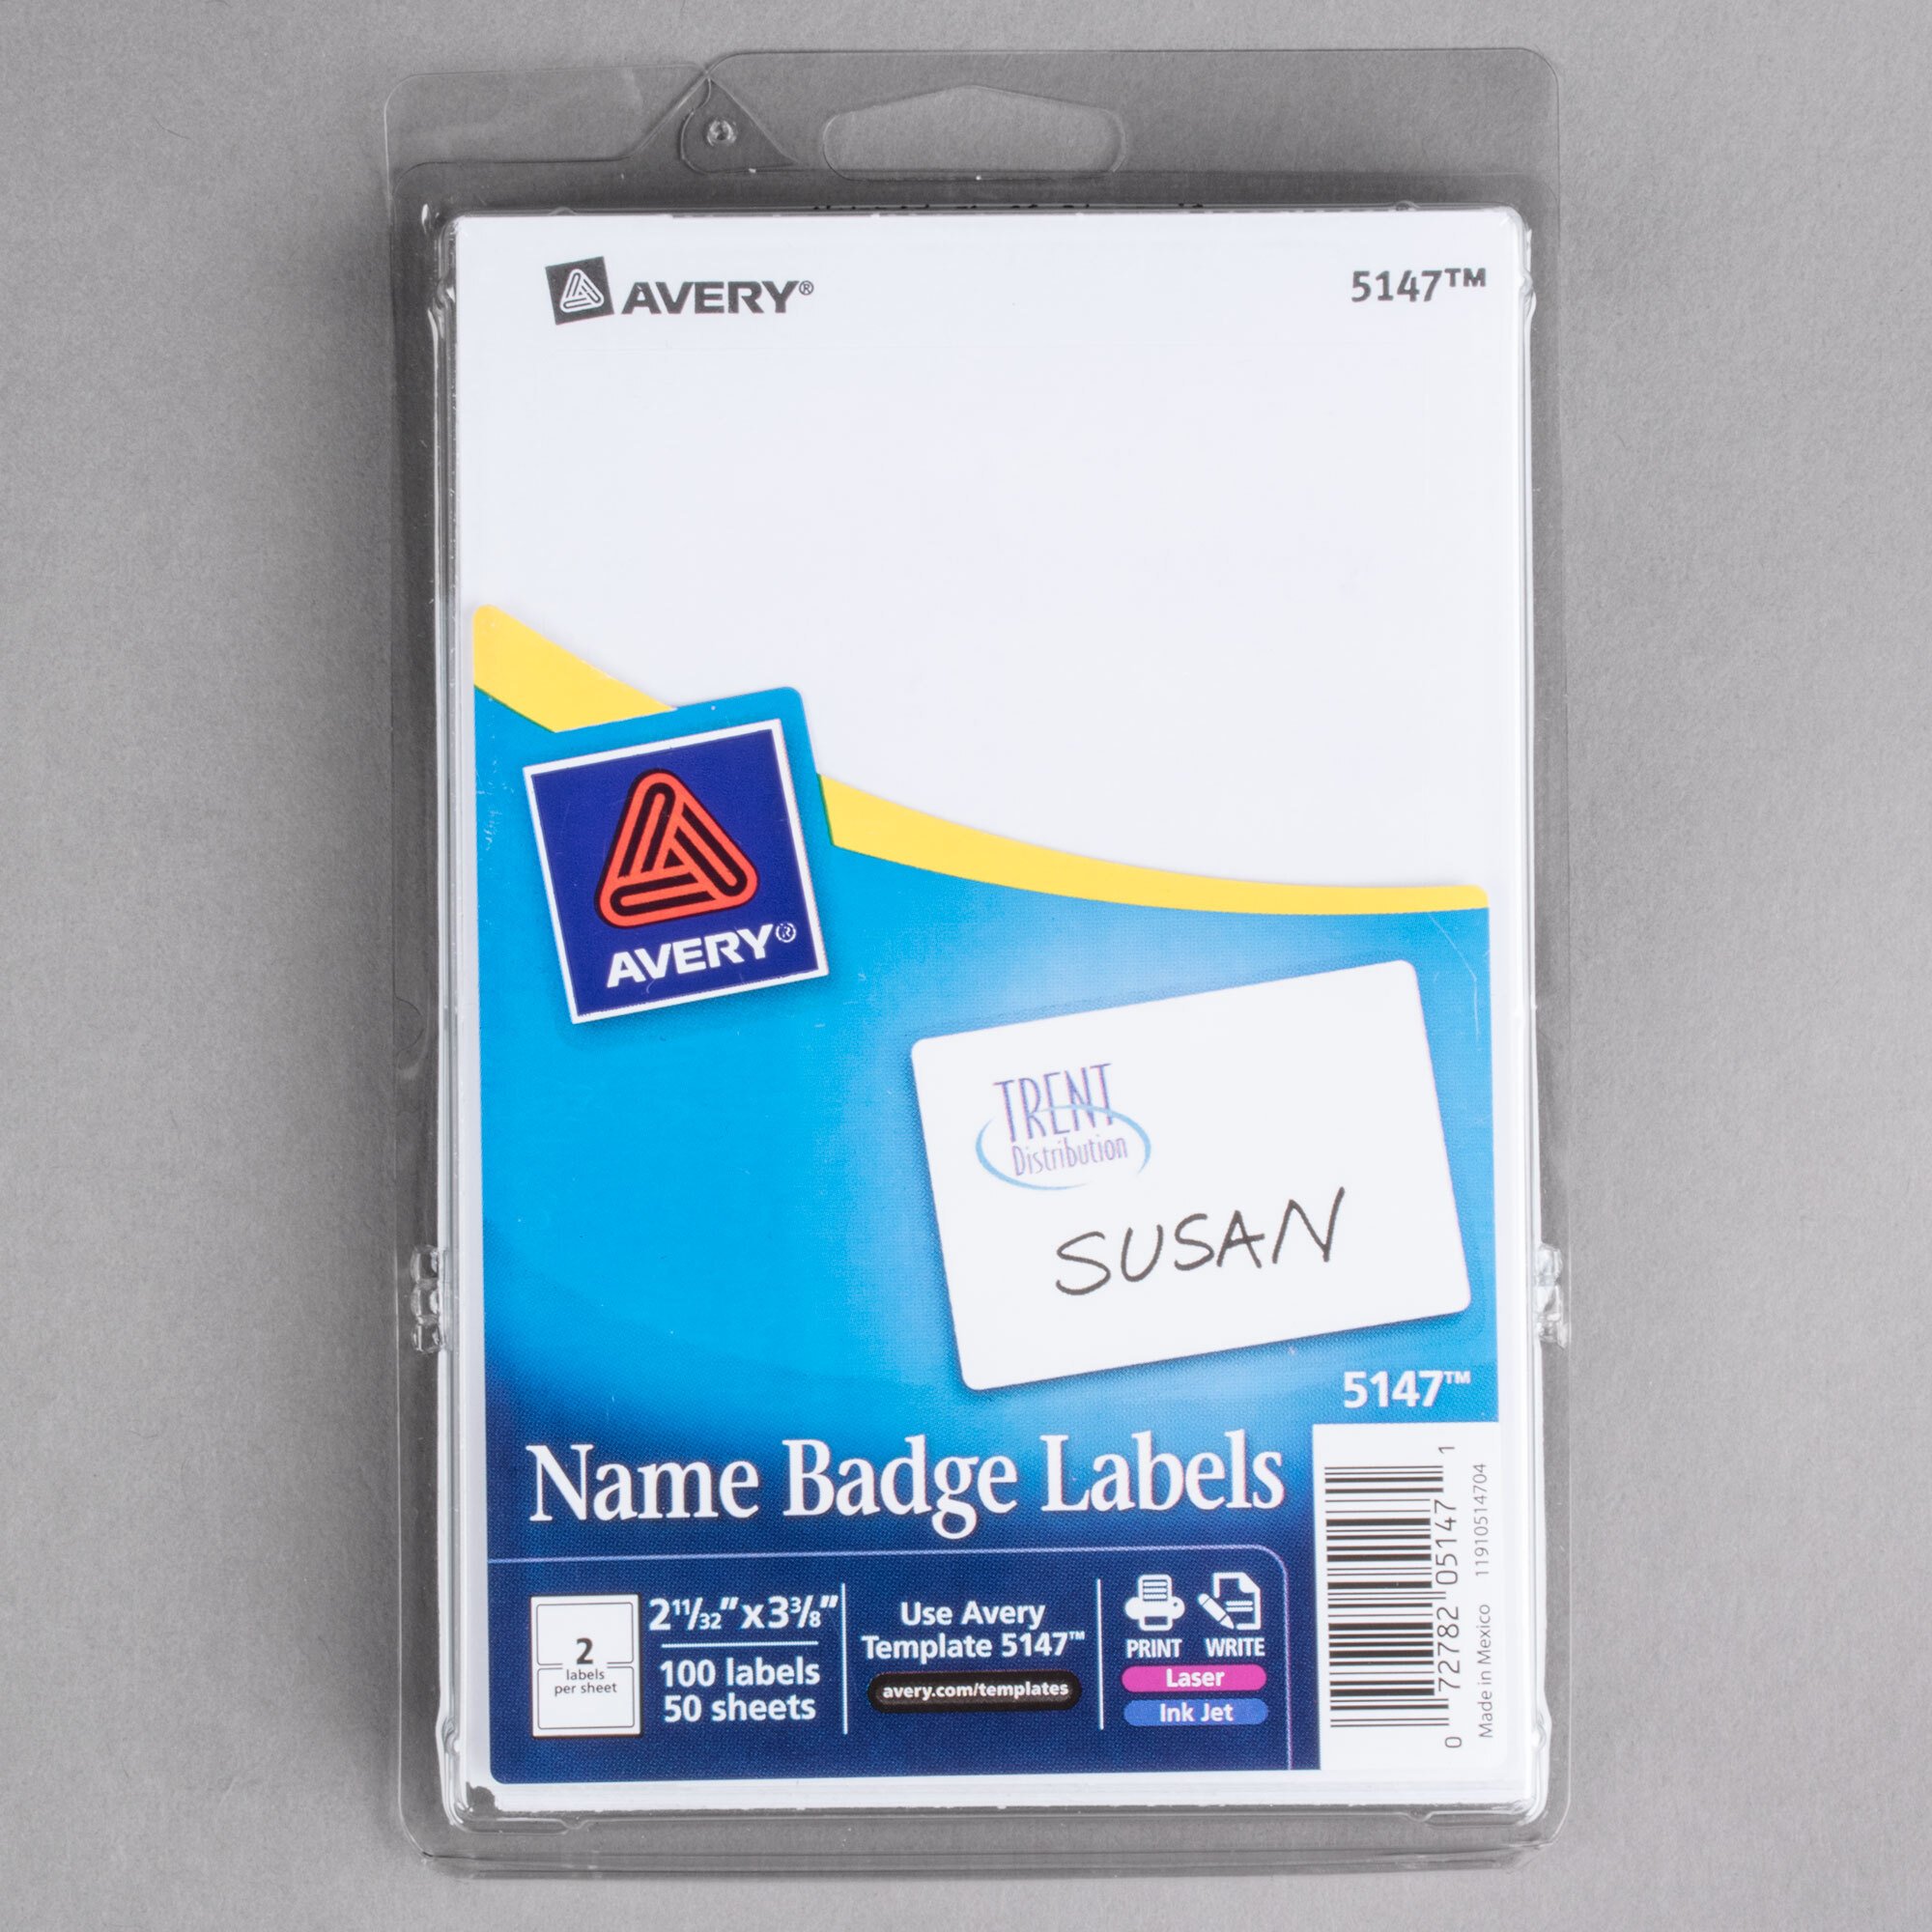 How To Print Avery Name Badges